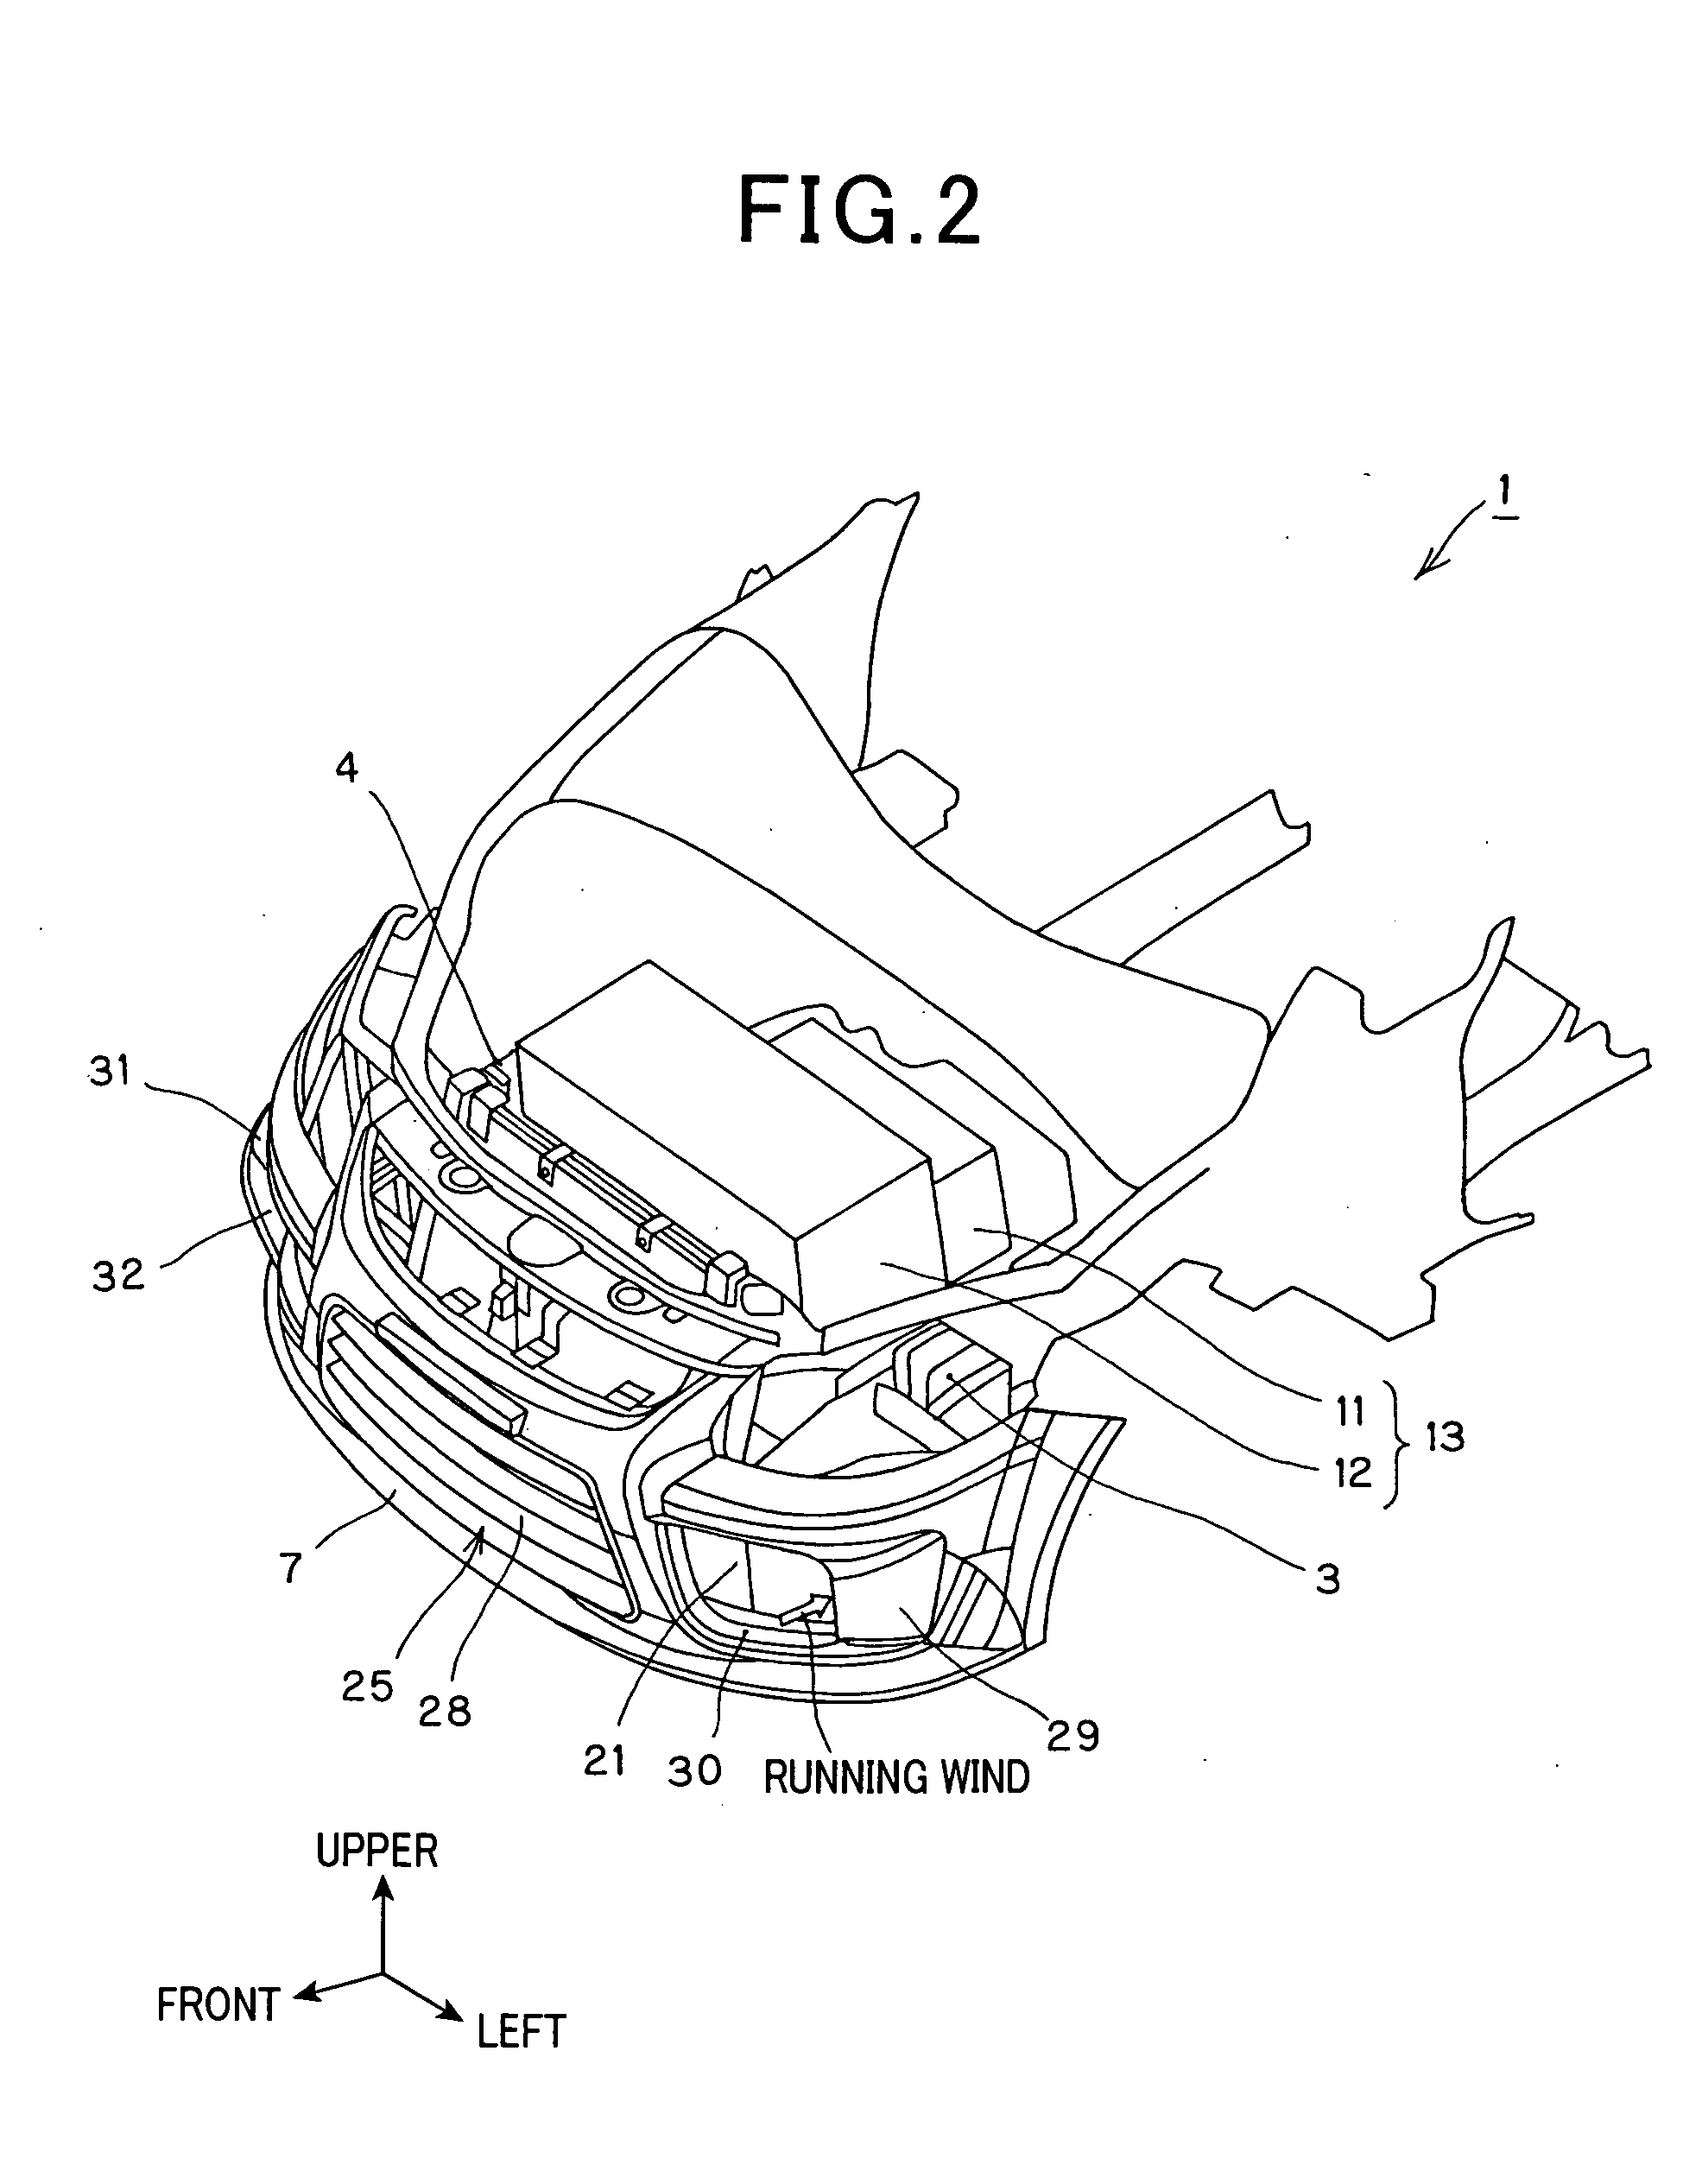 Cooling apparatus for a fuel cell powered vehicle